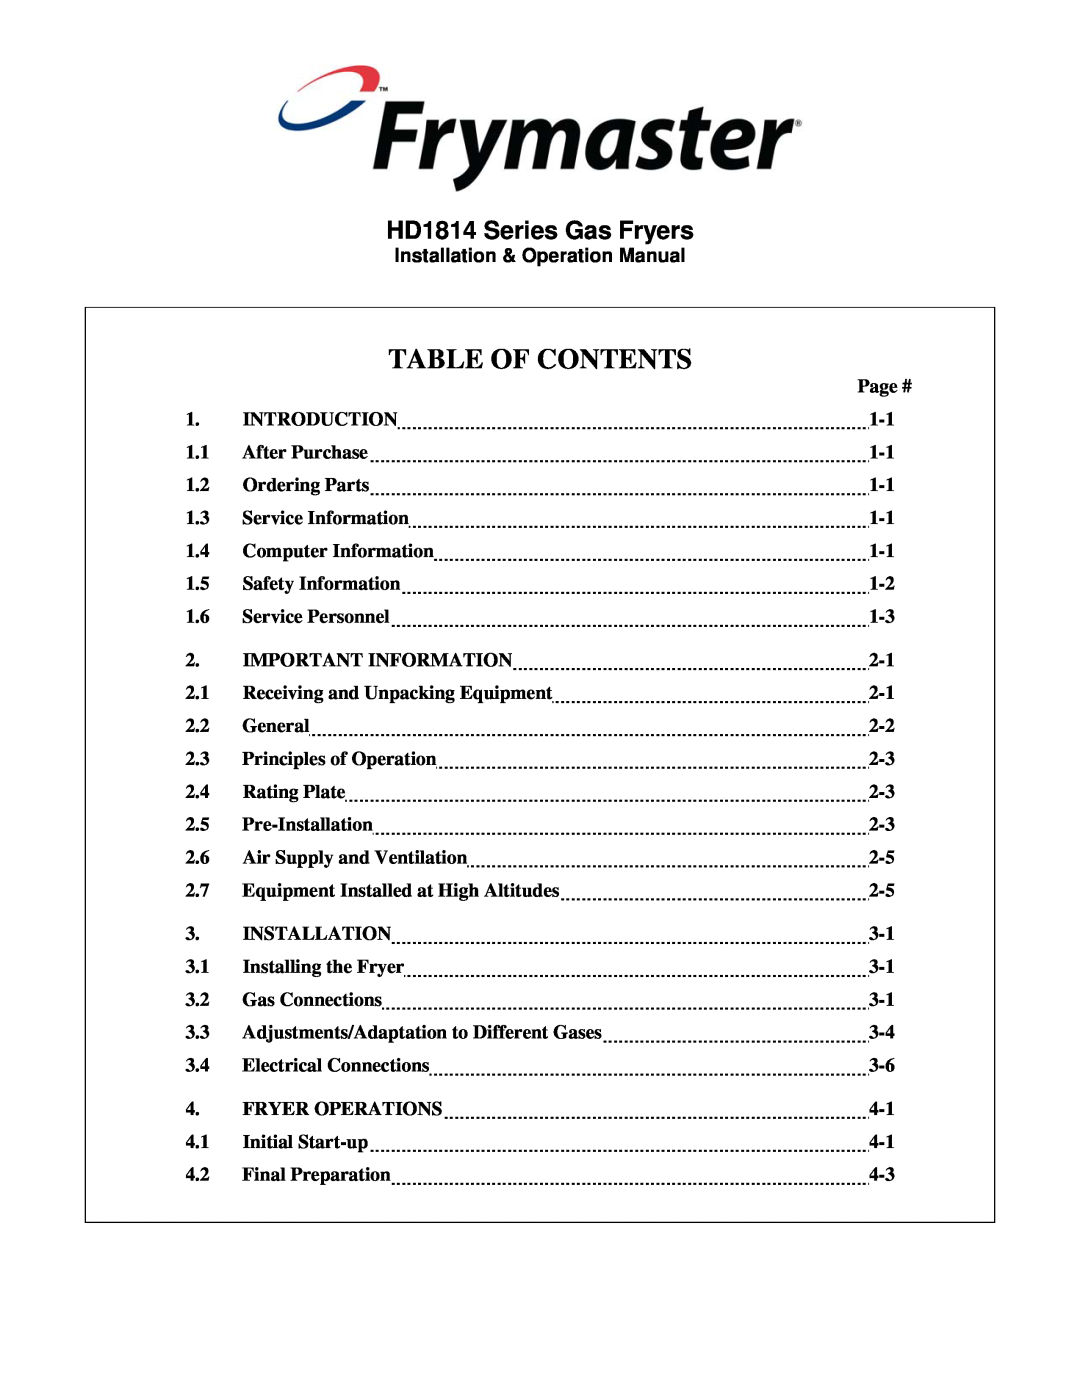 Frymaster HD21814150G, HD21814G, HD1814G operation manual Table Of Contents, HD1814 Series Gas Fryers 